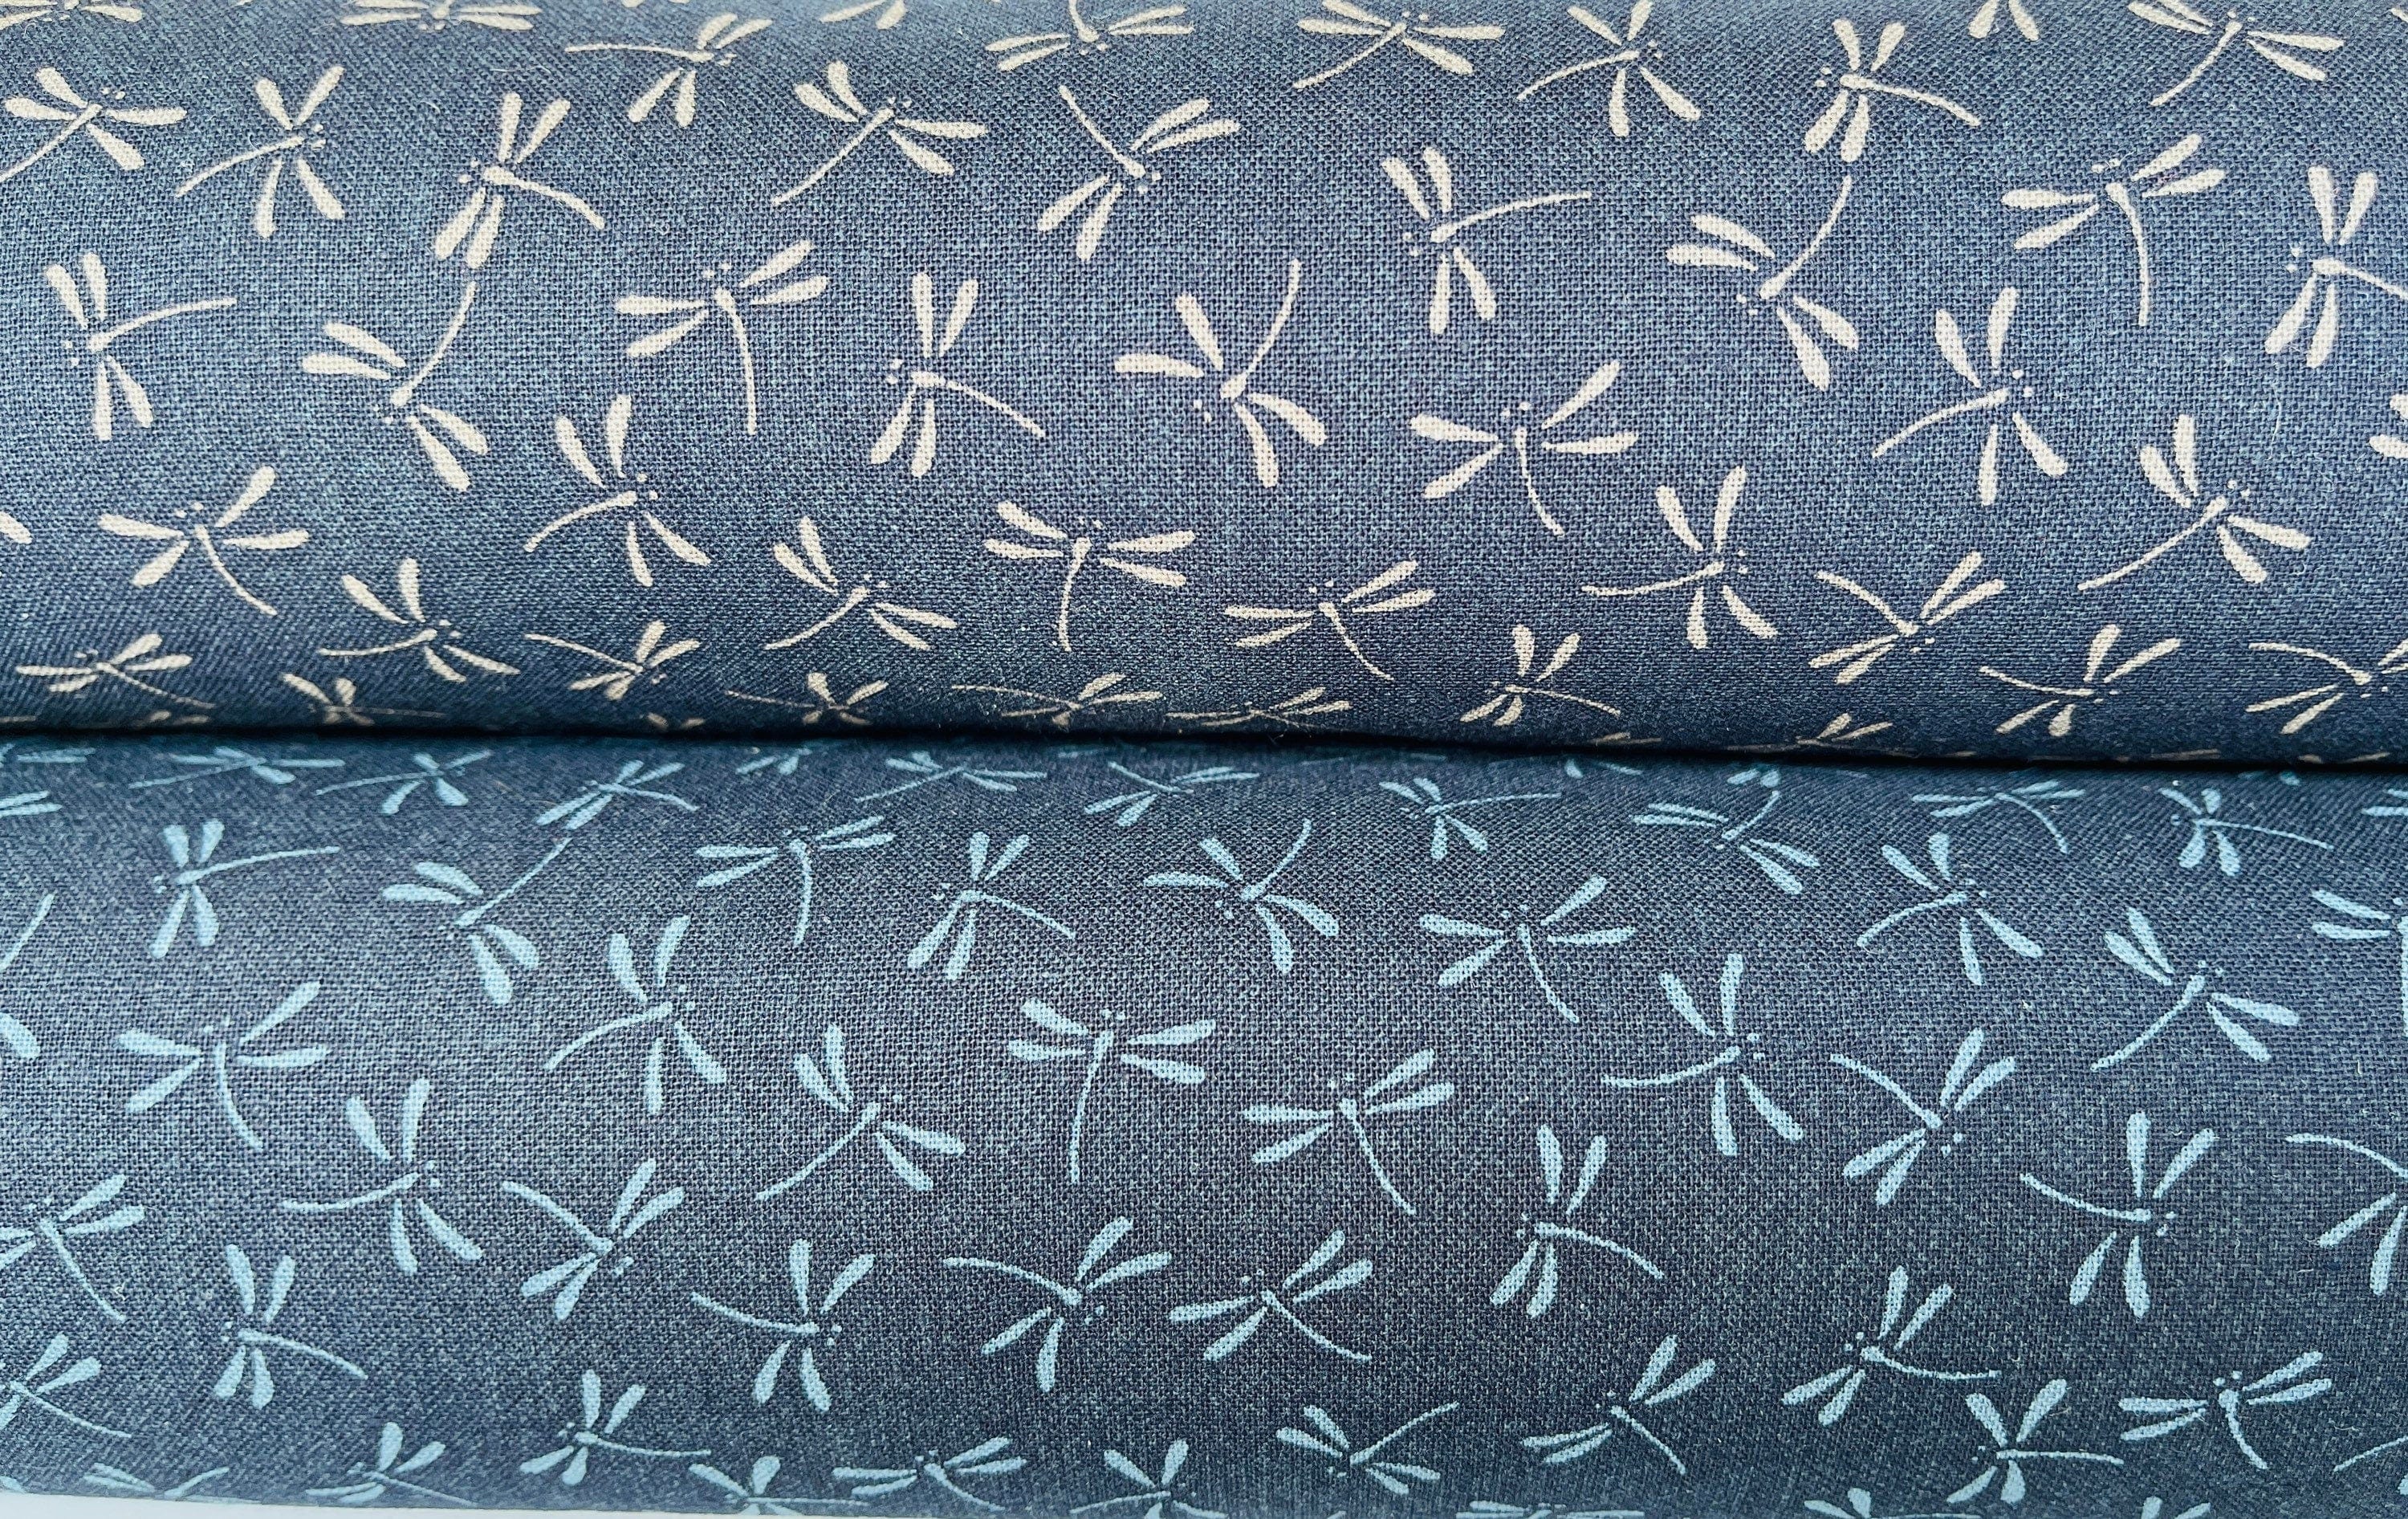 Dragonfly - Dragonfly Fabric - Westex - Sevenberry - Japanese Textile - Cotton Printed Sheeting - 88222-7-15